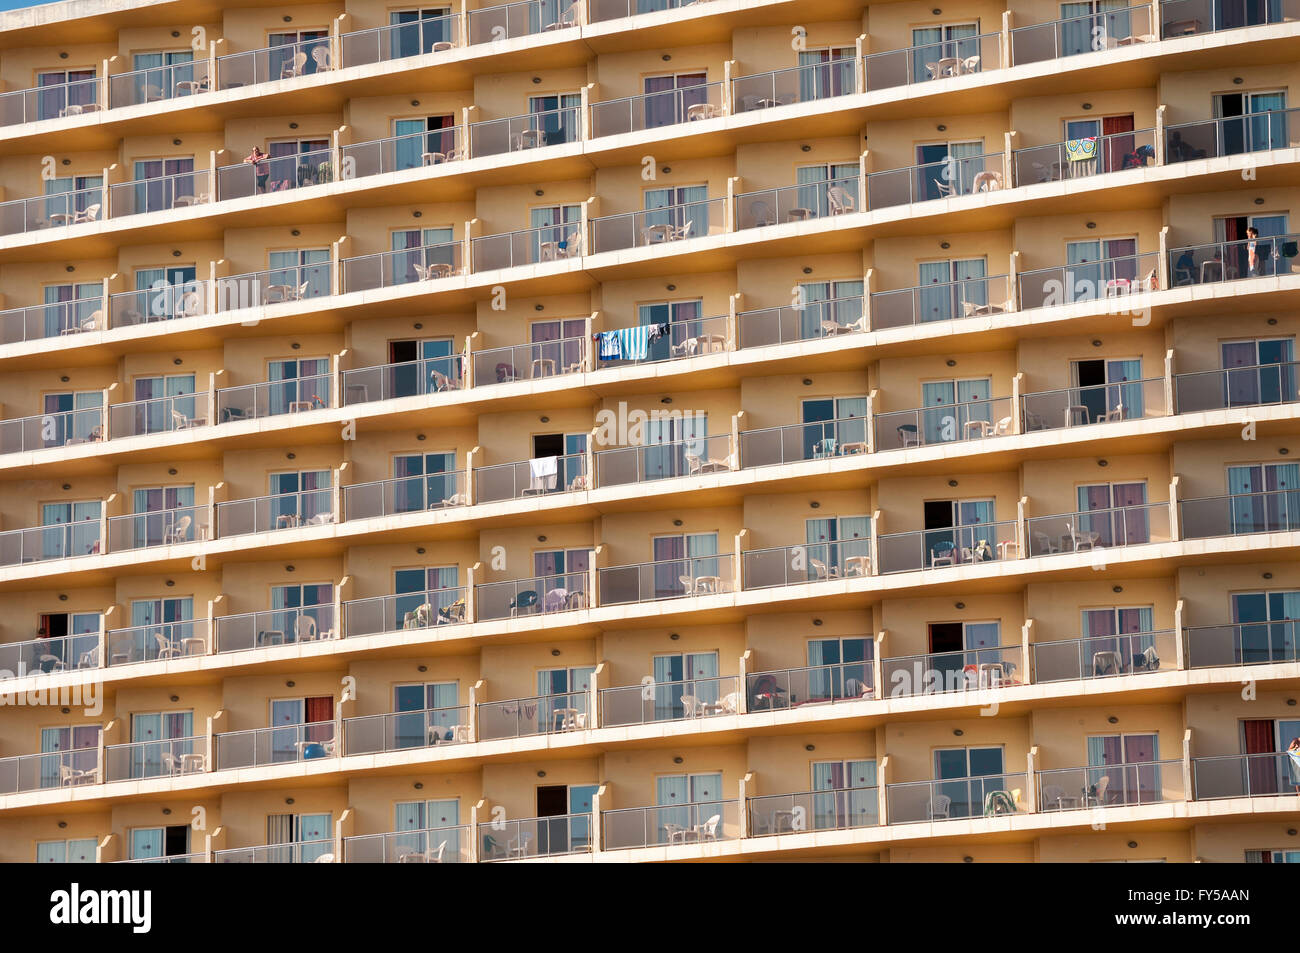 Rows of balconies on the facade of a large hotel complex in Torremolinos, Costa del Sol, Spain Stock Photo